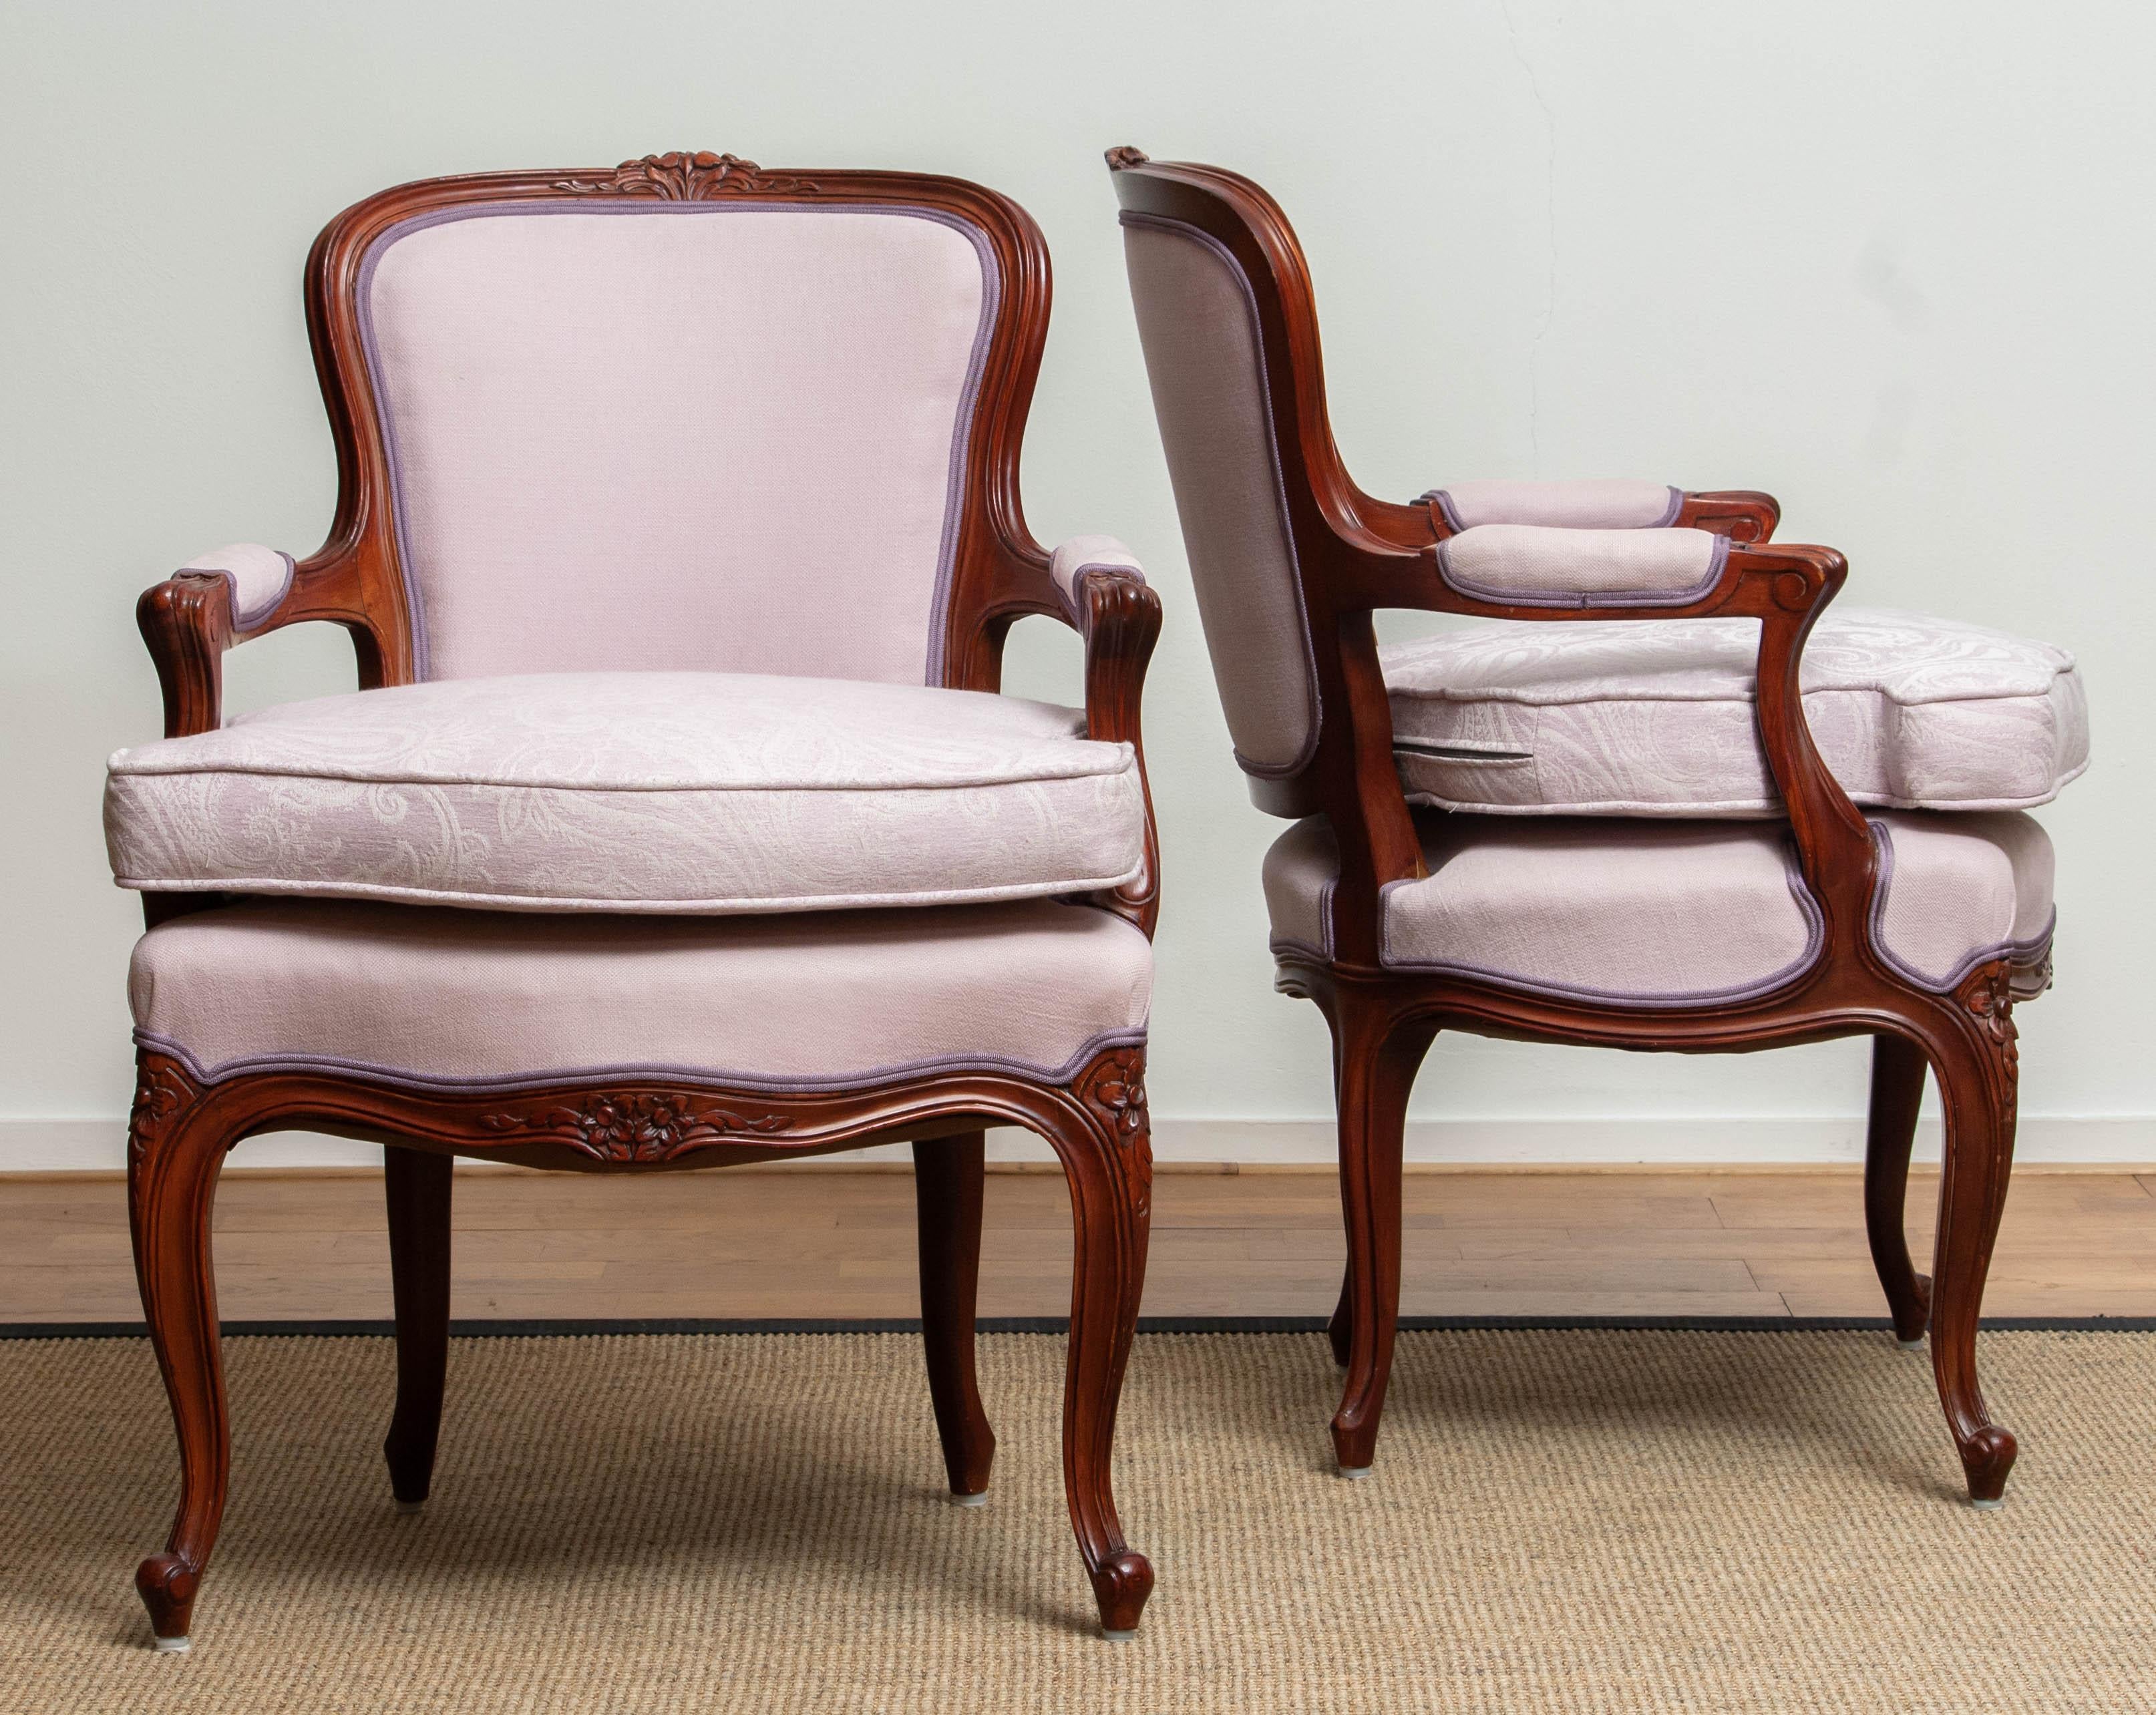 Fabric 1950s Pair of Pink Swedish Rococo Bergères in the Shabby Chic Technique Chairs F